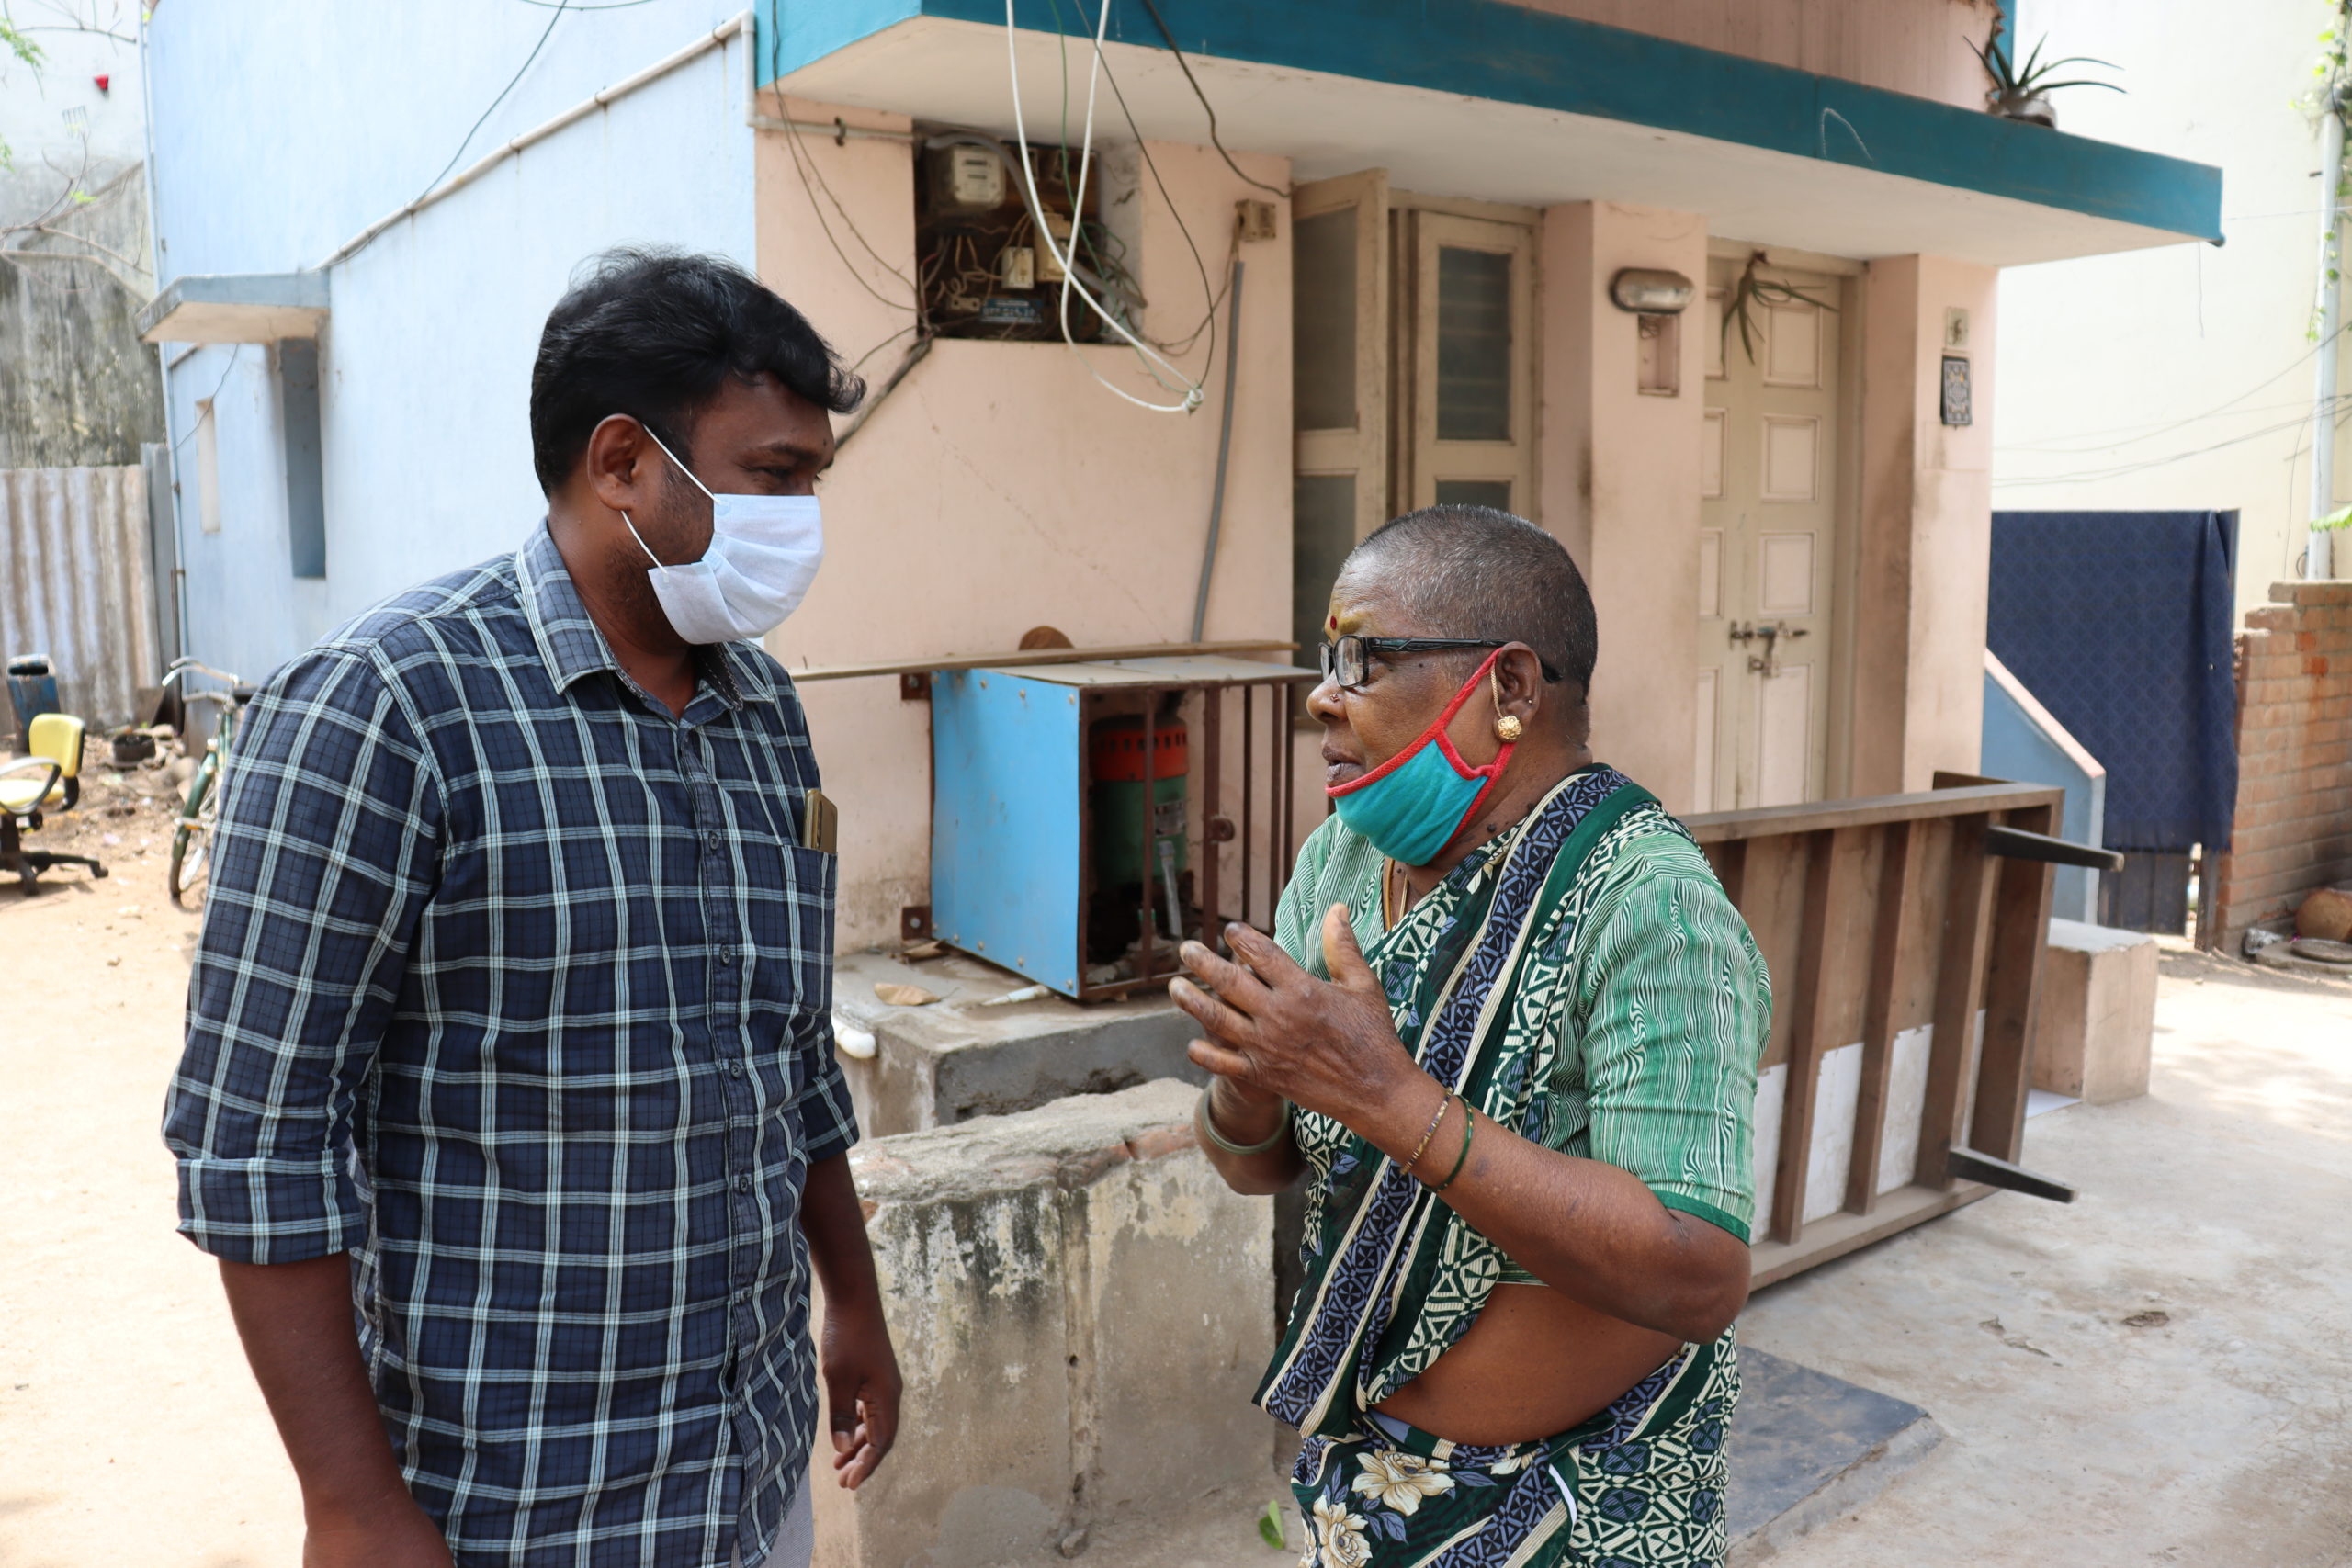 Afraid to go near leprosy patients, now he’s a compassionate friend